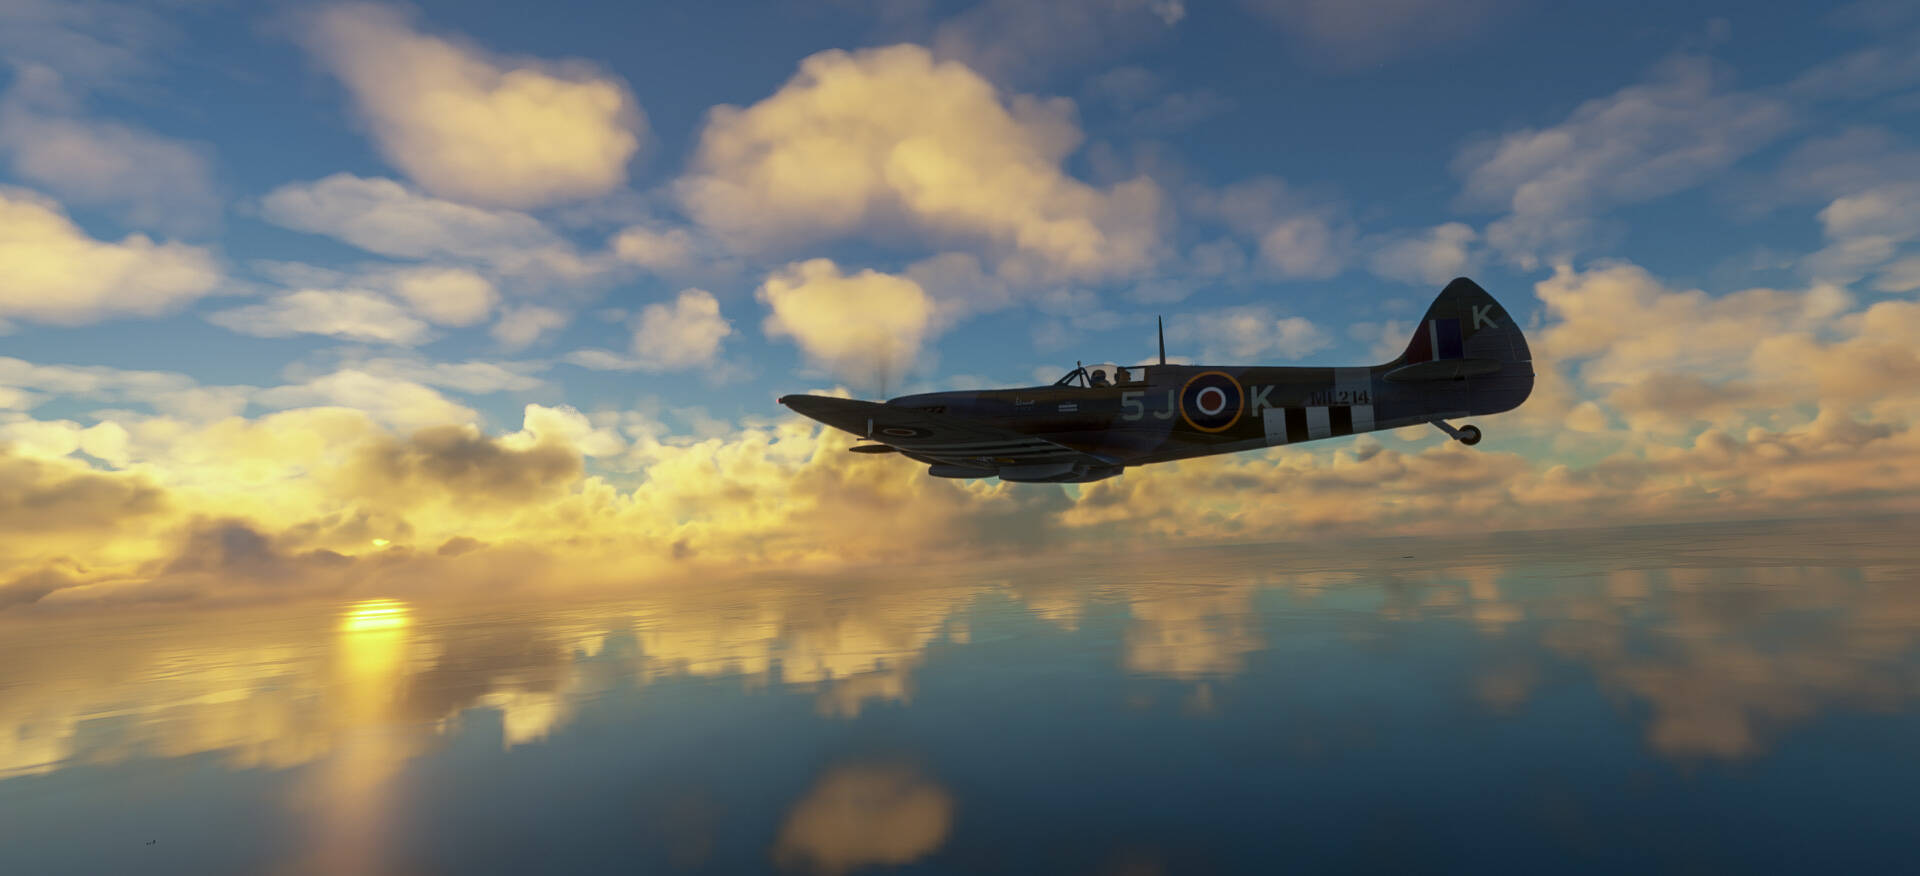 A Supermarine Spitfire flies low above a body of water. The clouds and sun are reflected in the water.